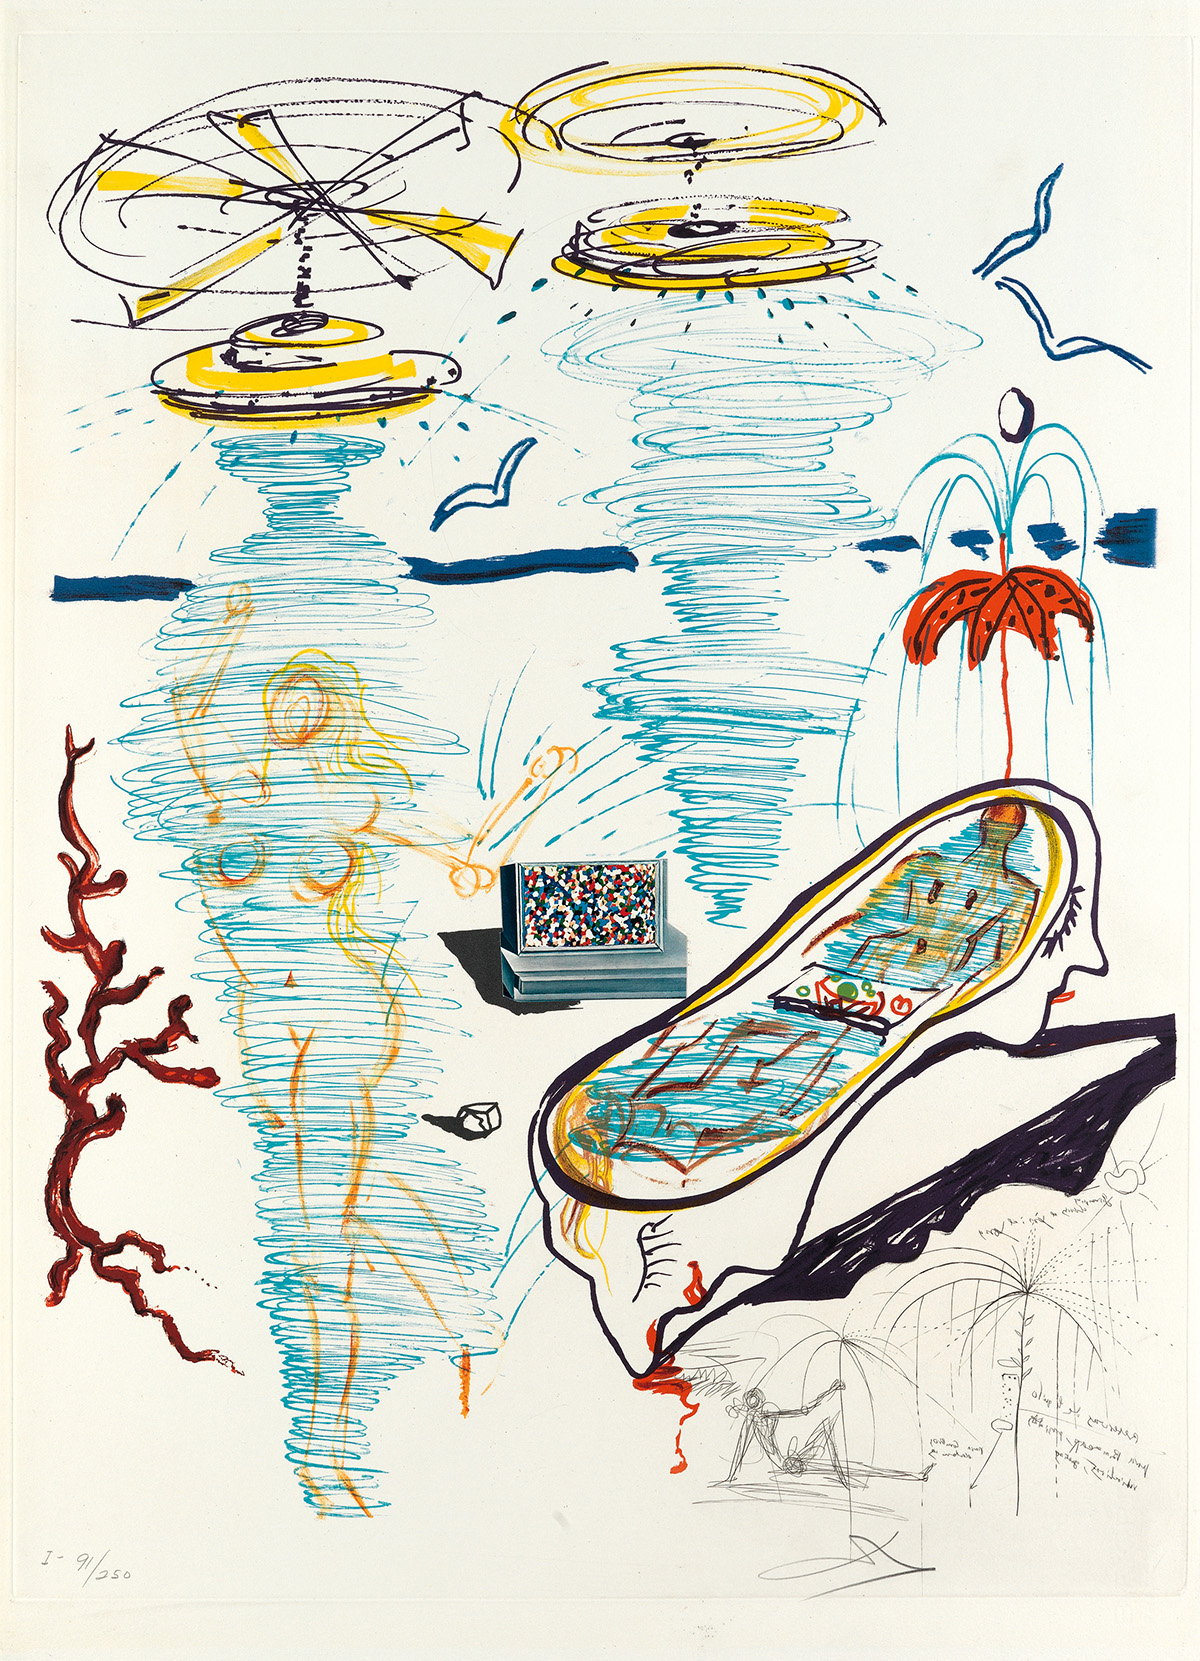 SALVADOR DALÍ Imaginations and Objects of the Future.